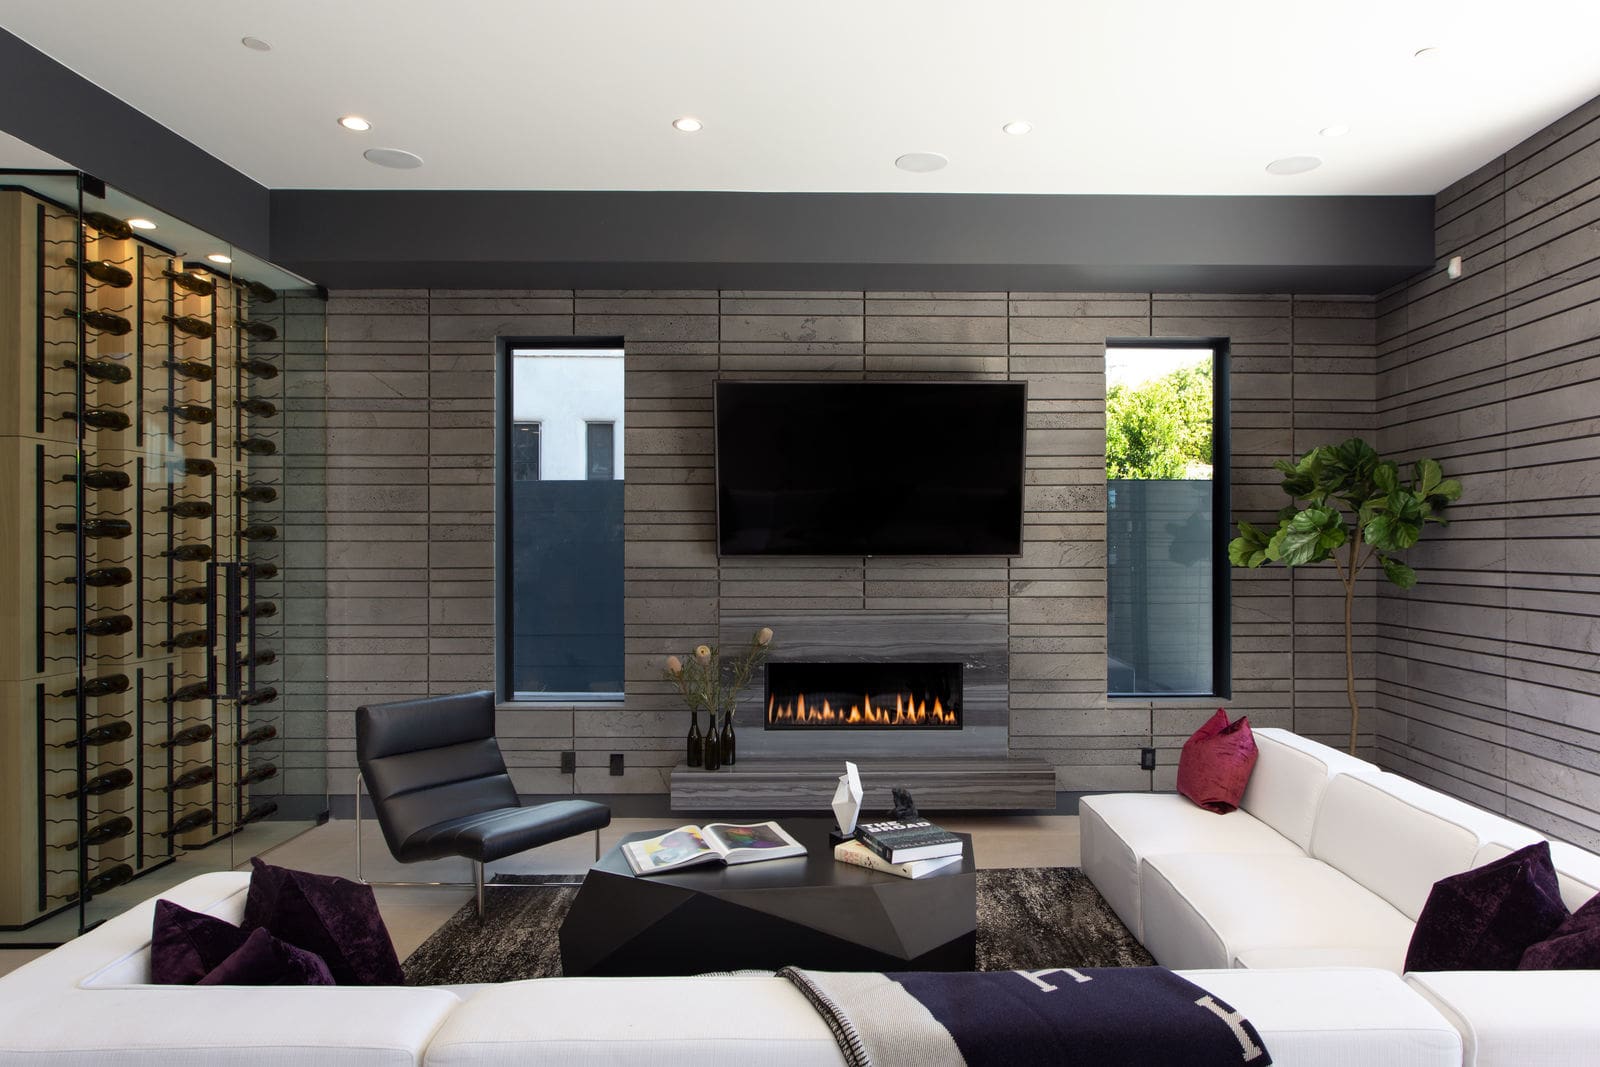 Norstone Platinum Planc Large Format Tile used as a background feature wall behind a large tv and smooth stone fireplace